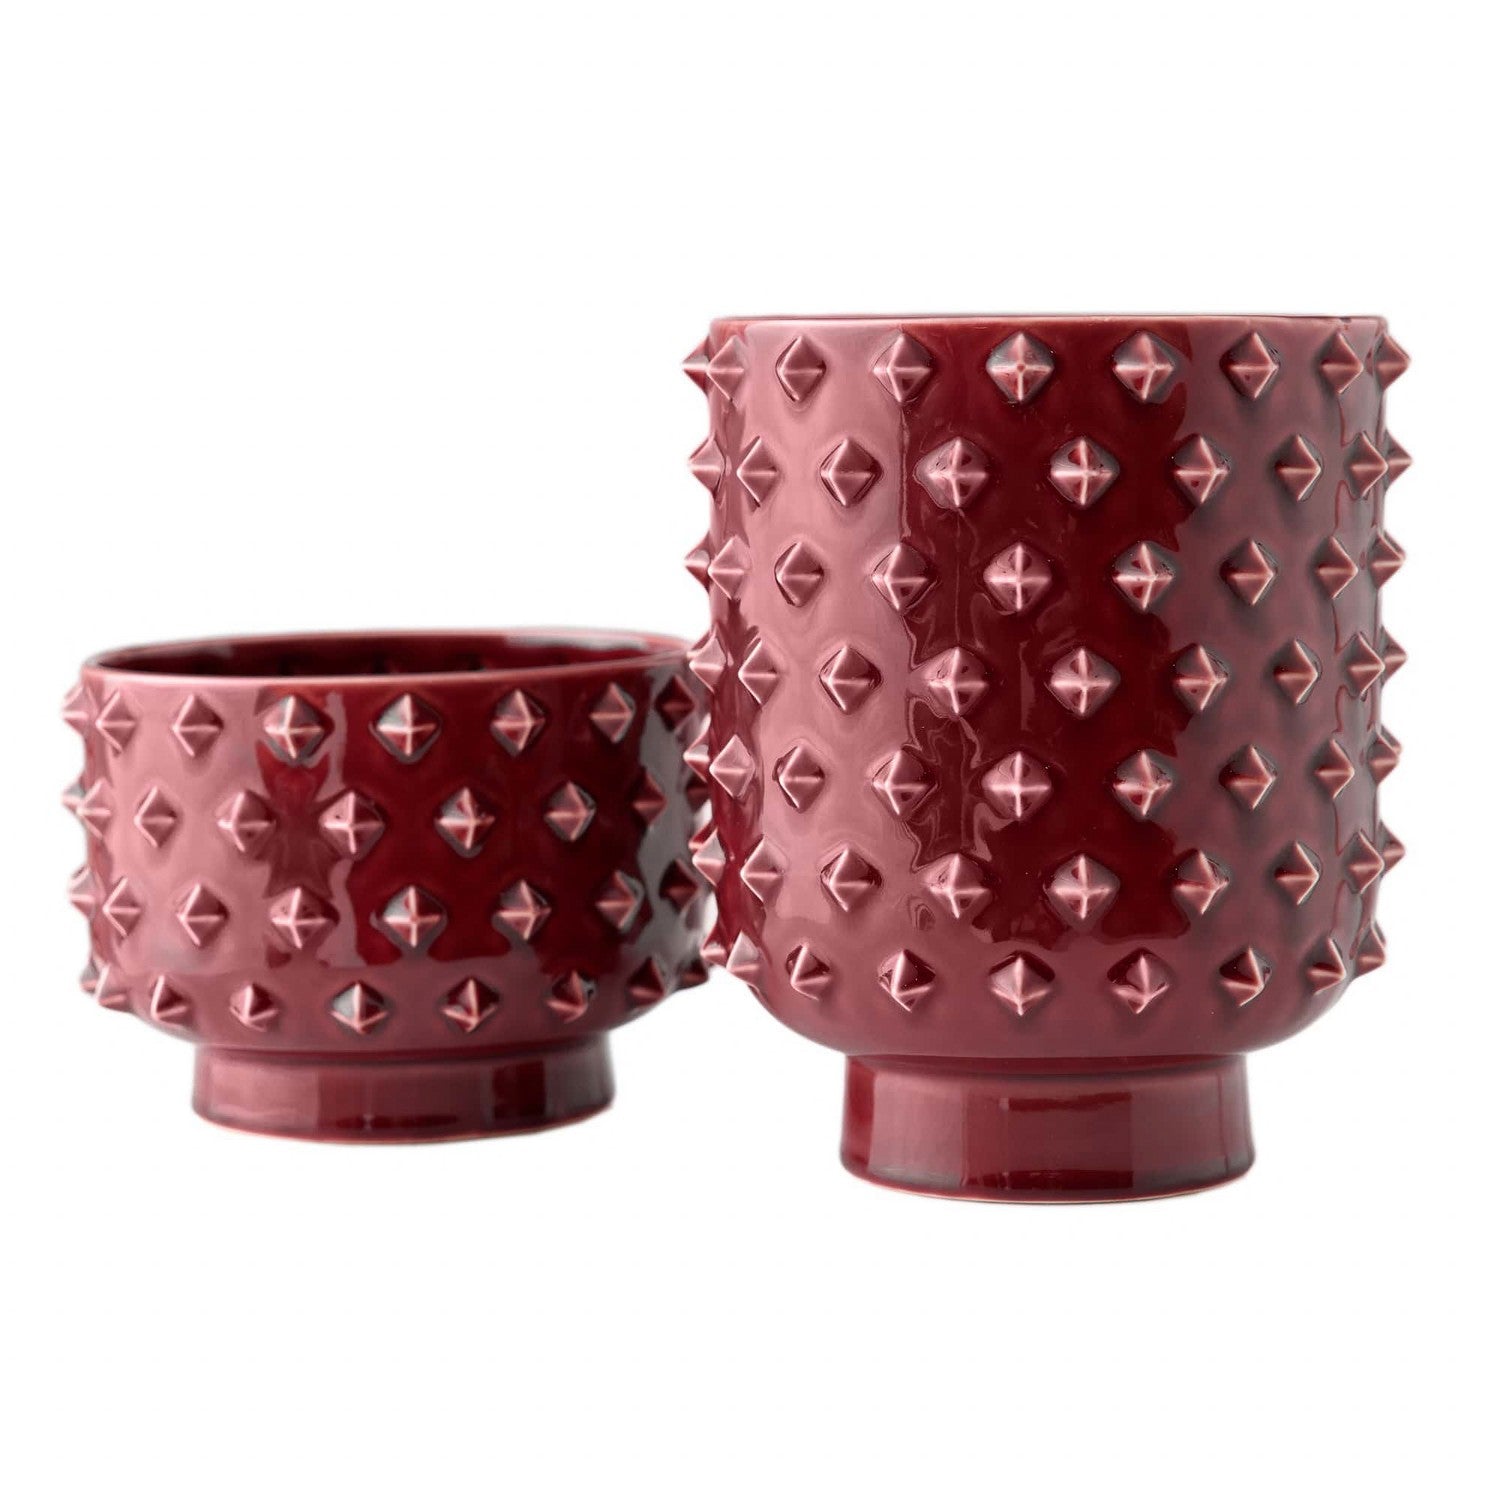 Vases, Set of 2 from the Valika collection in Garnet finish